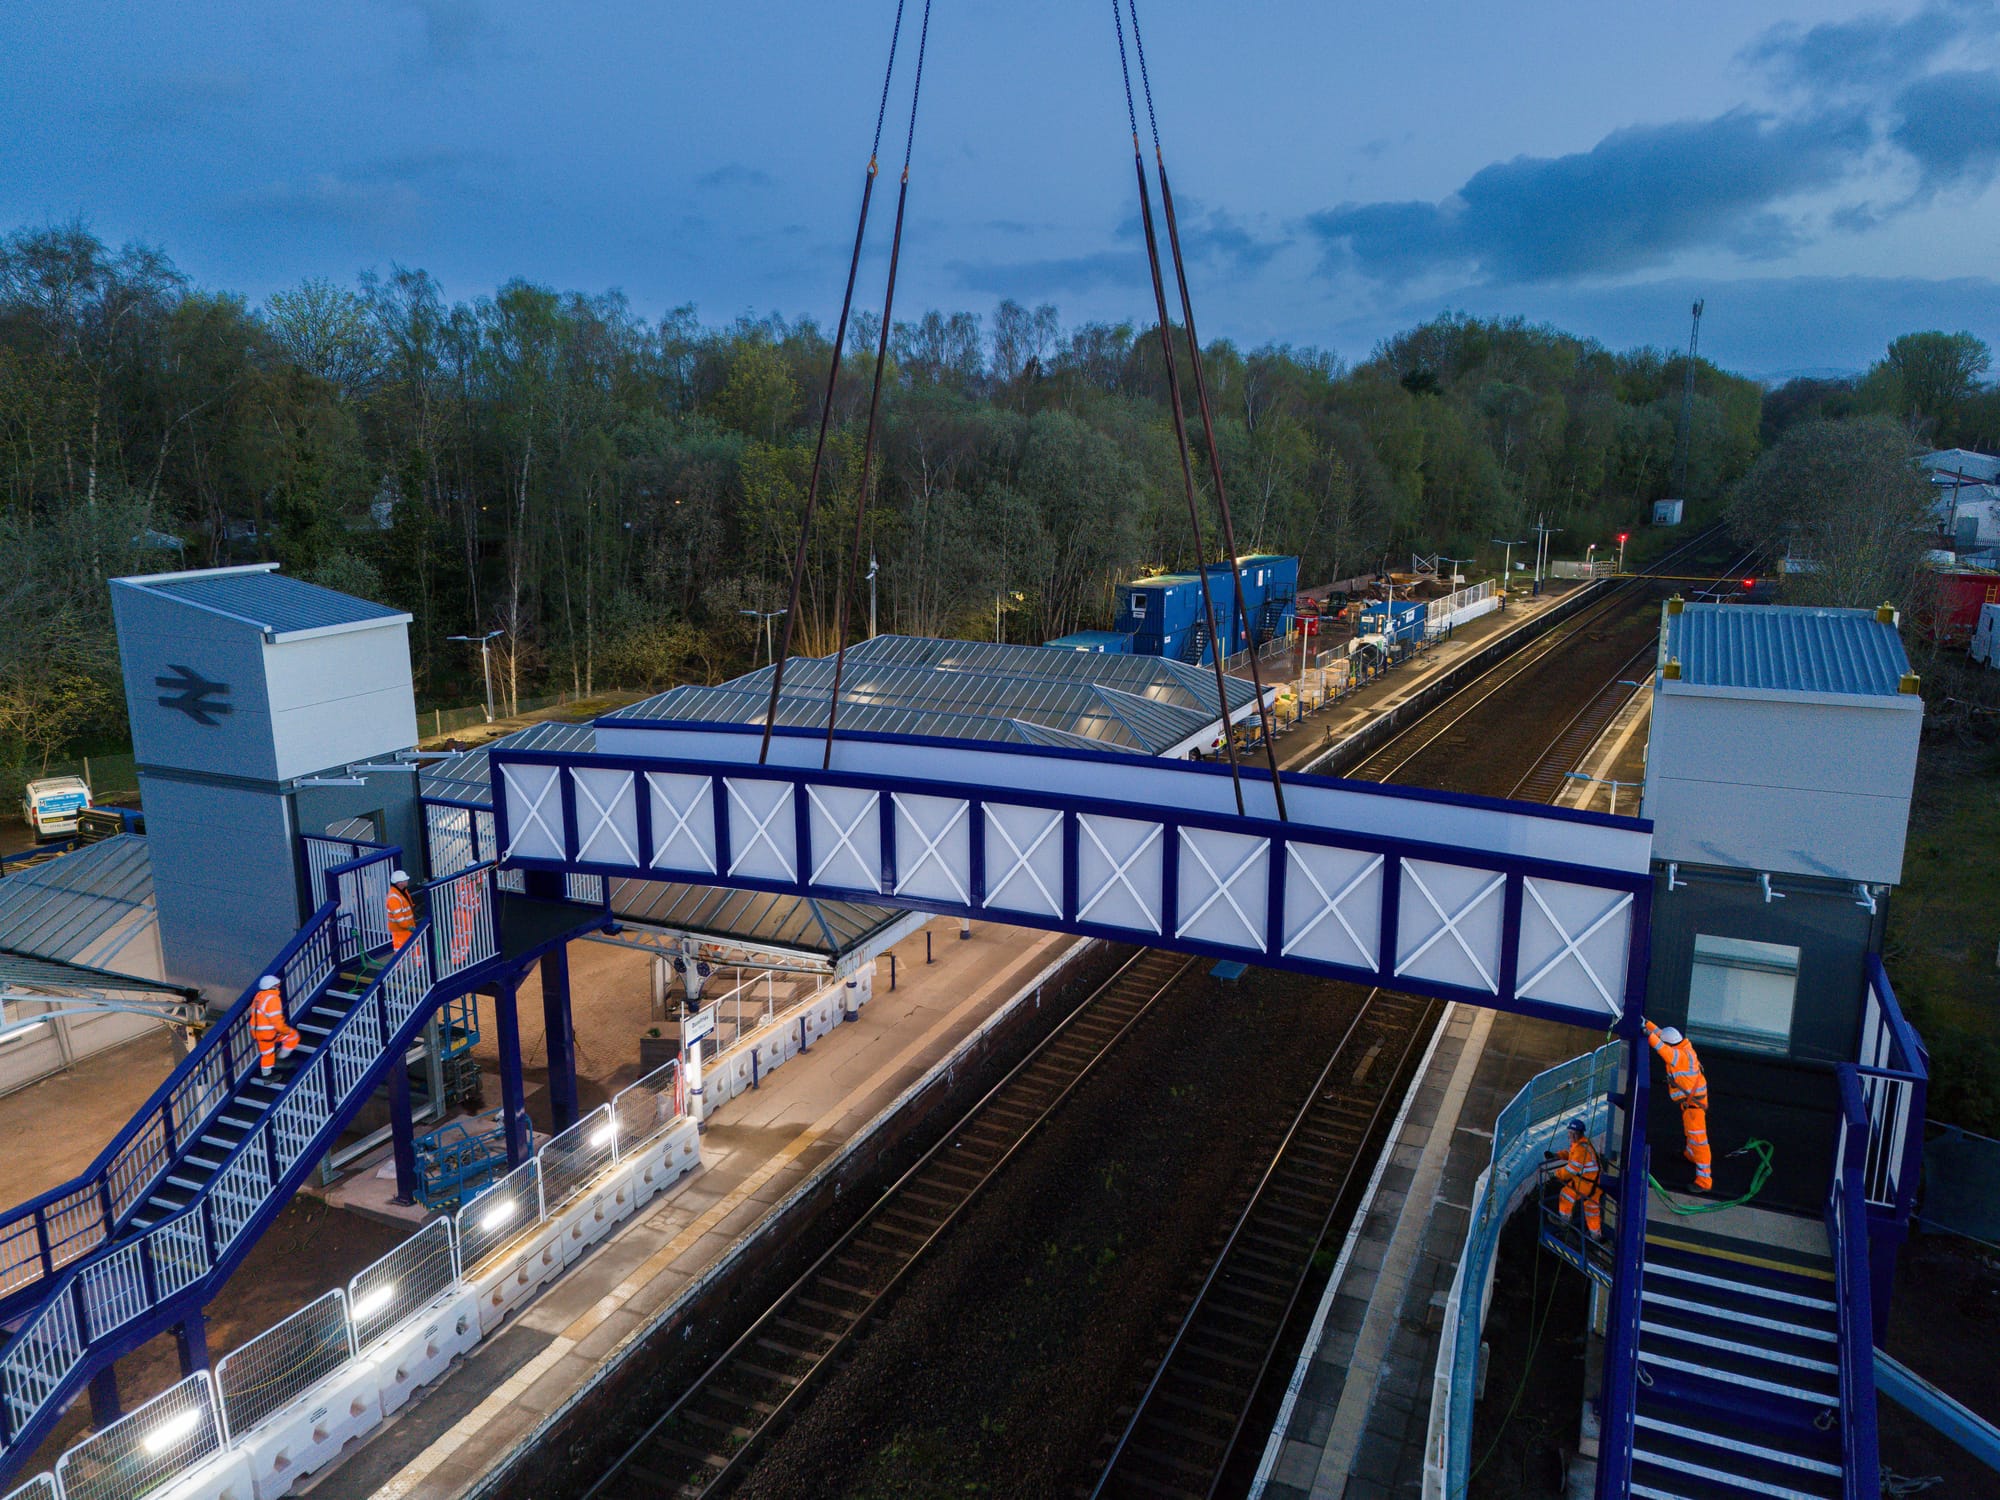 The white and blue footbridge, as seen from above, is lowered by a crane (out of frame) between two sets of stairs.